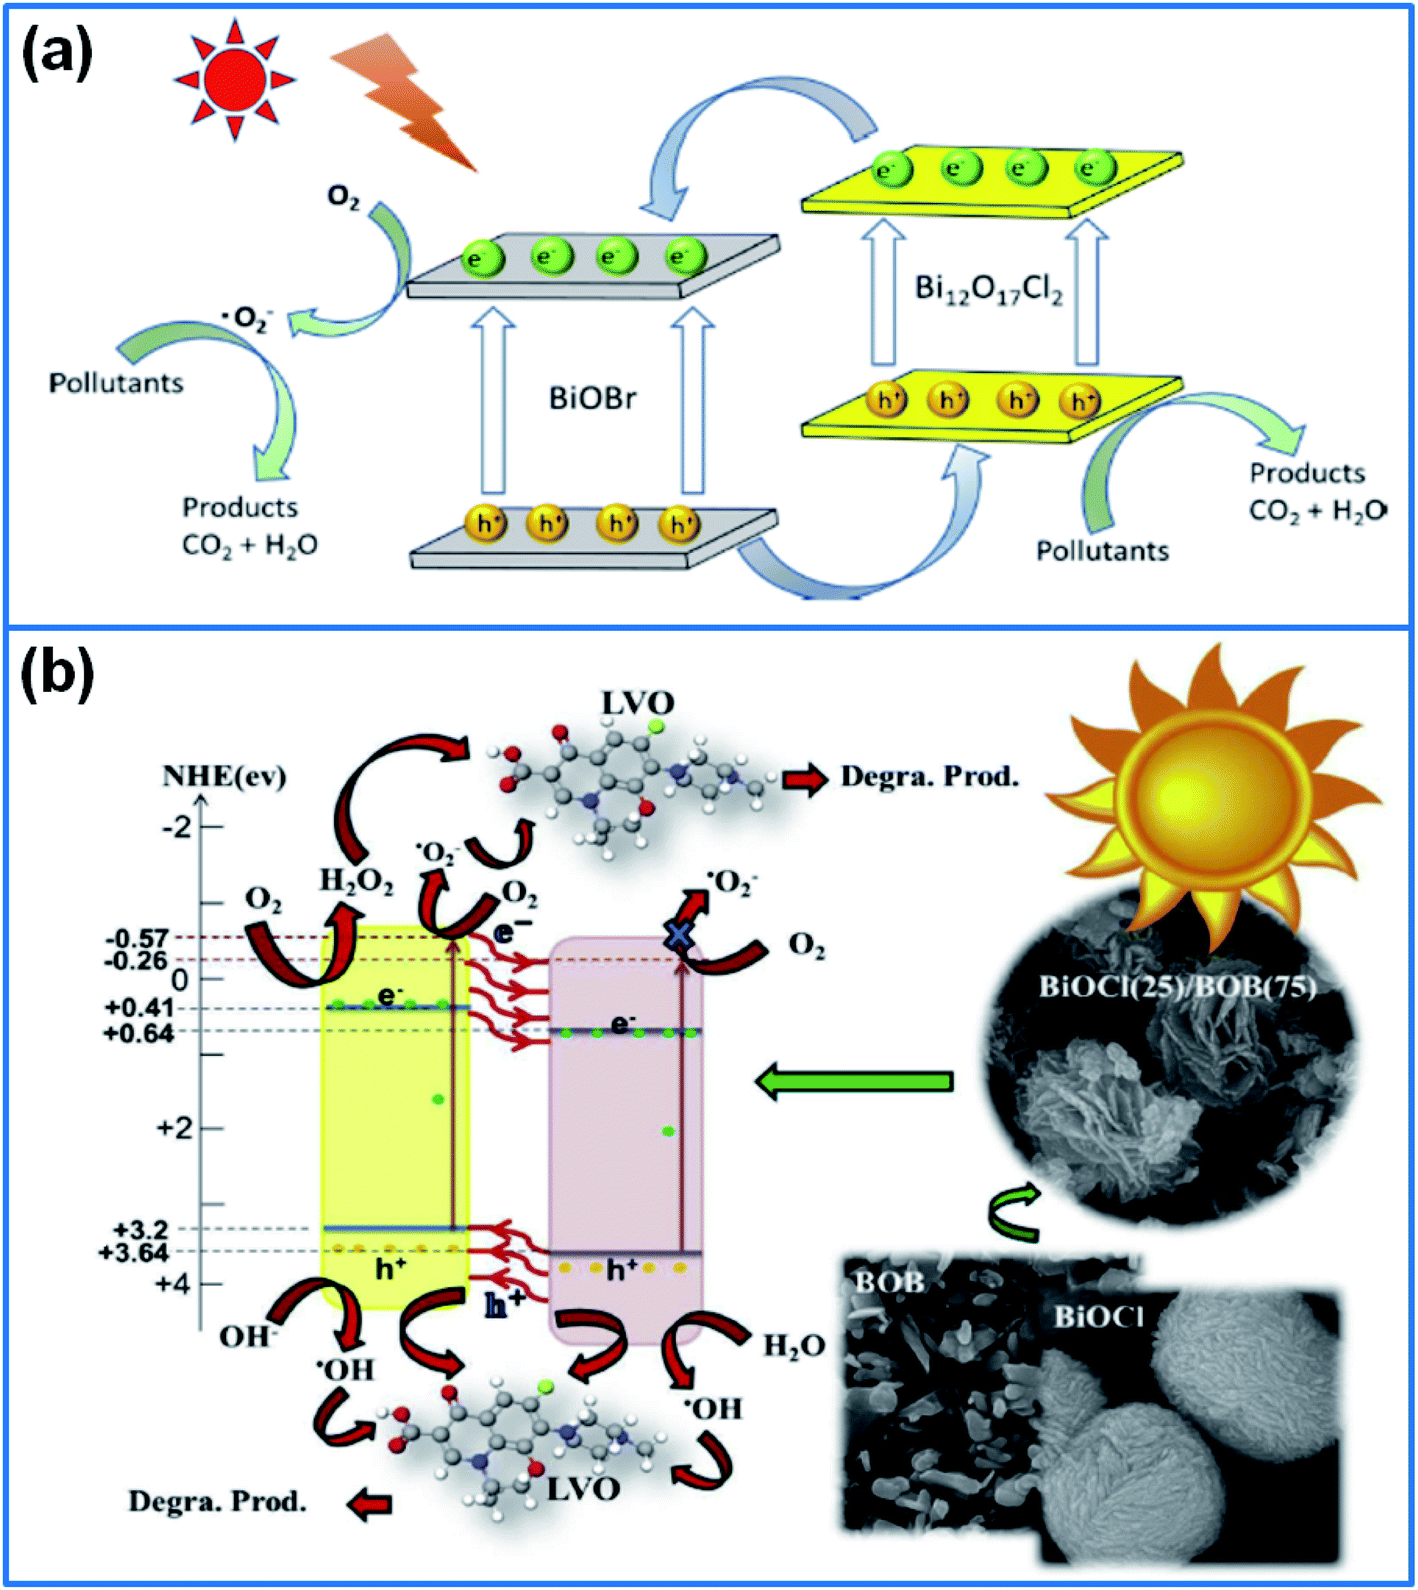 Recent advances in bismuth-based photocatalysts: Environment and